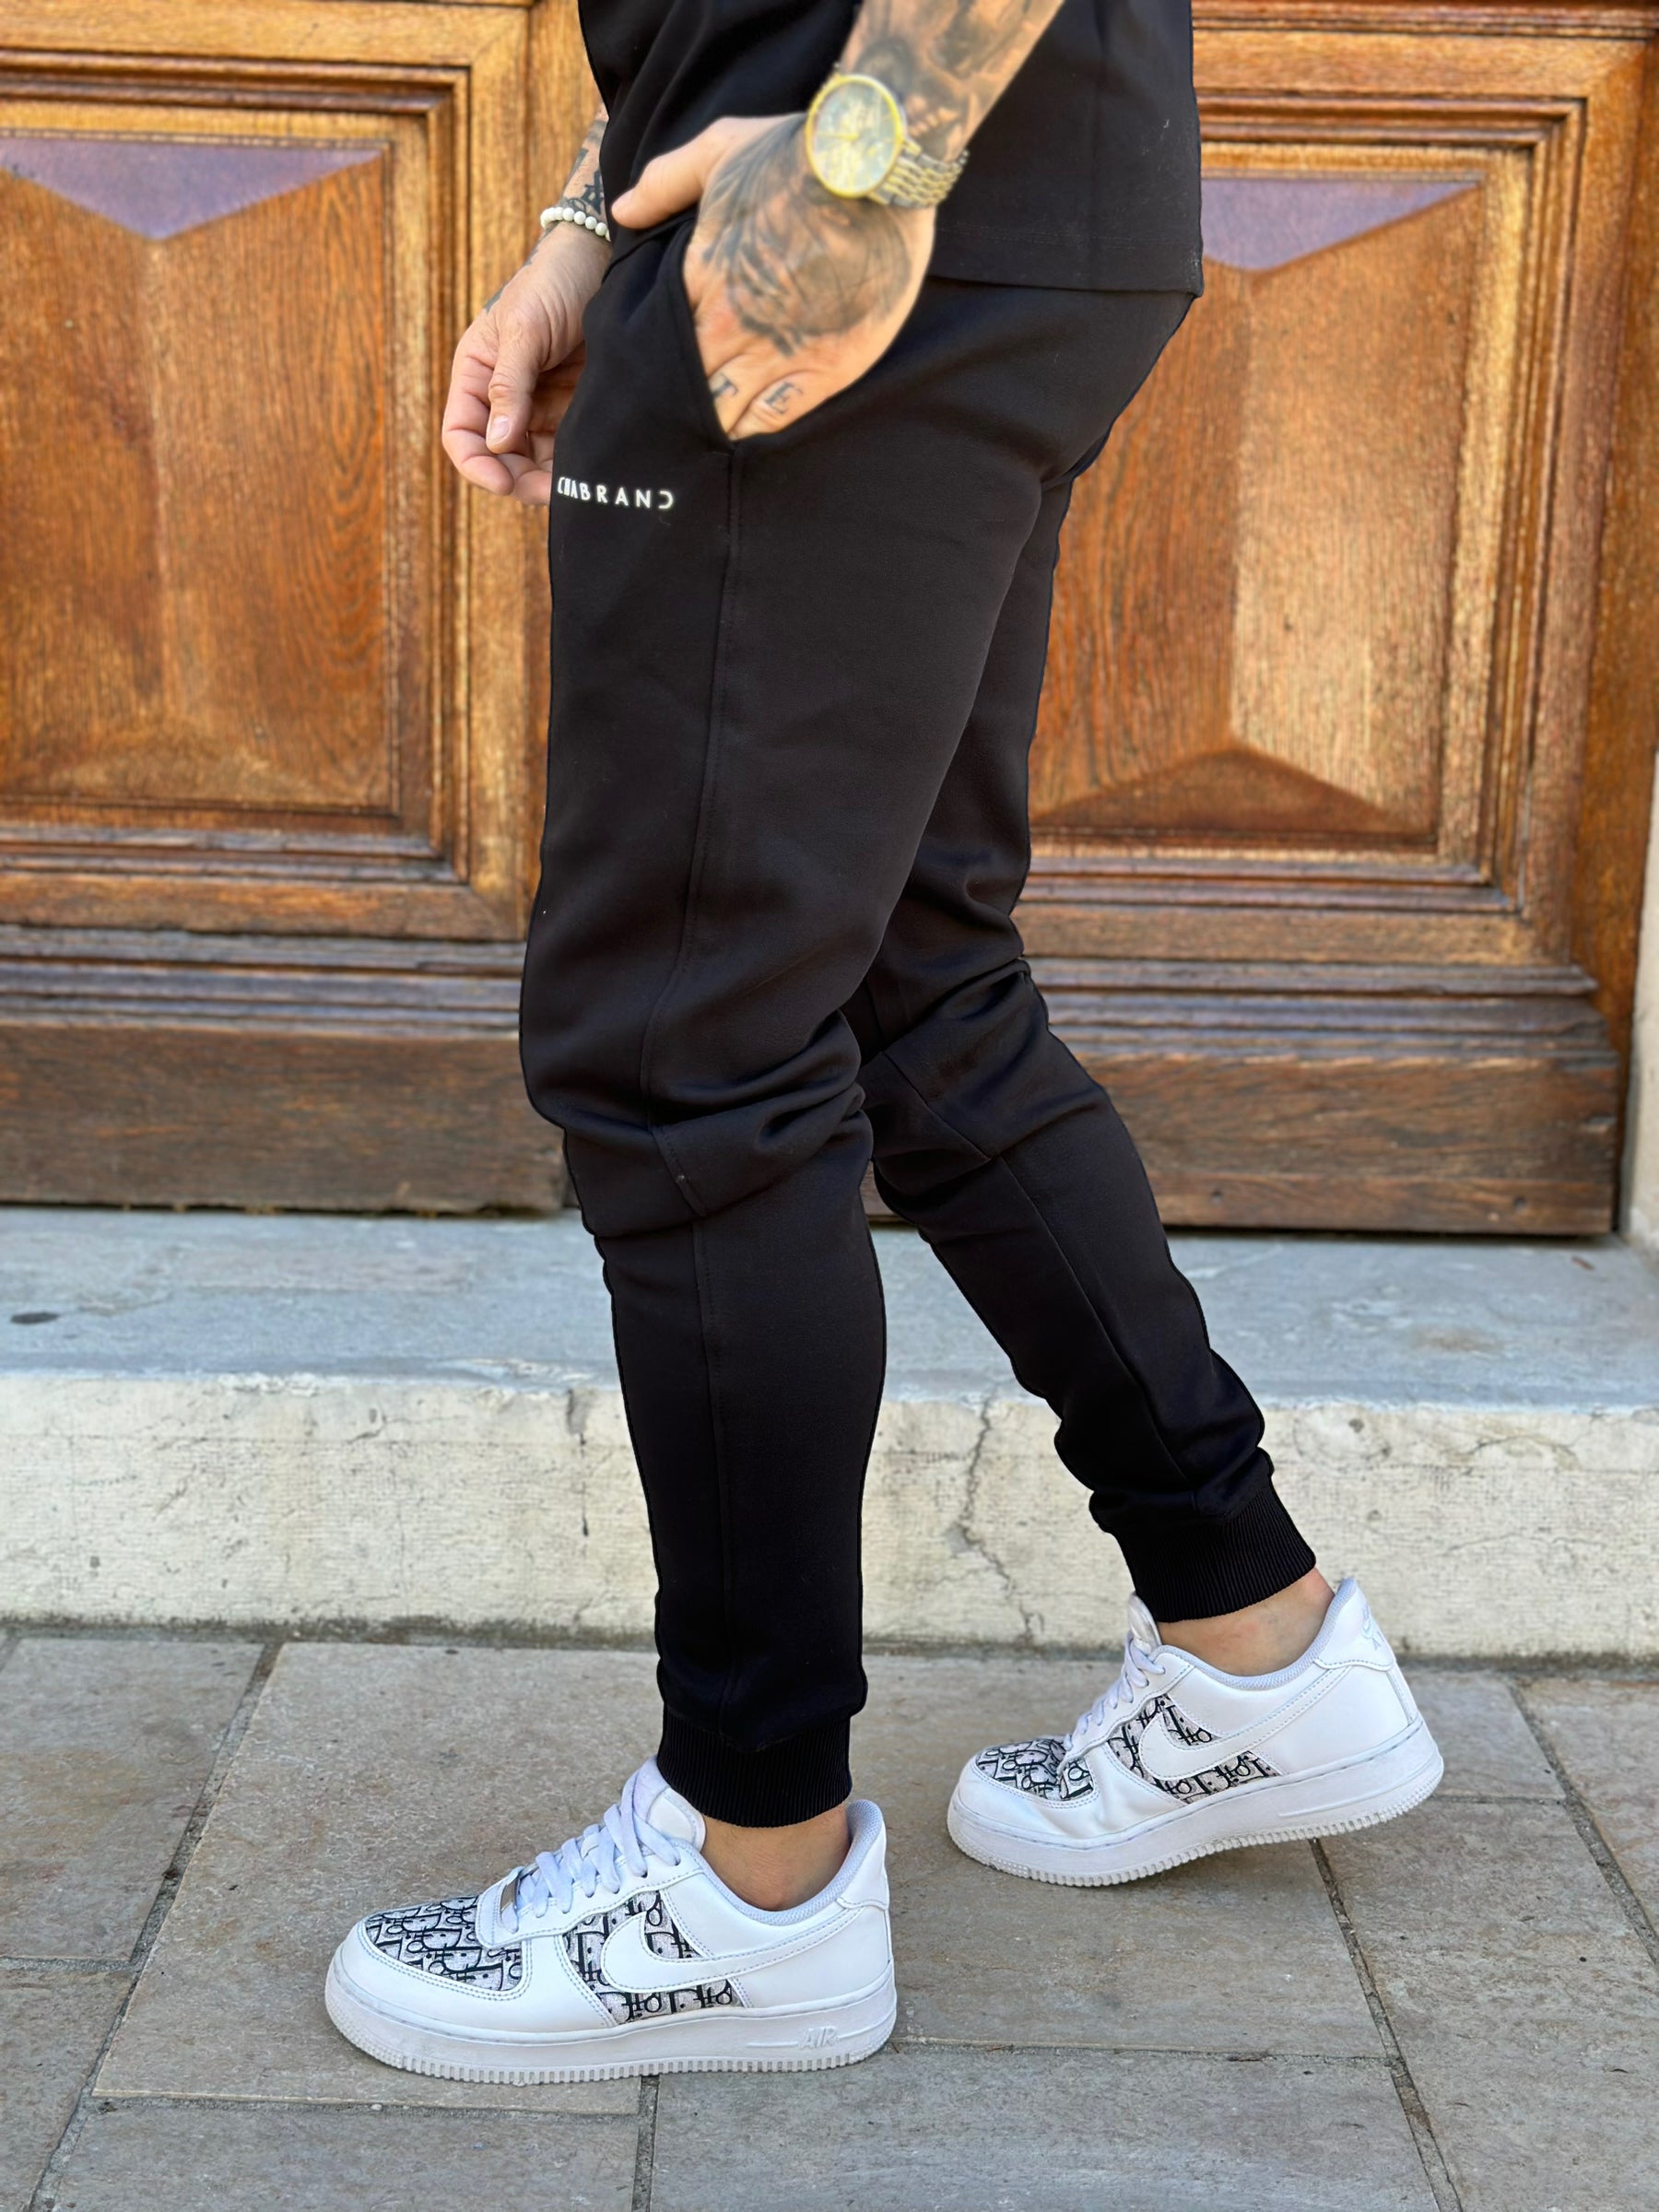 CHABRAND - Black jogging pants with small white sign